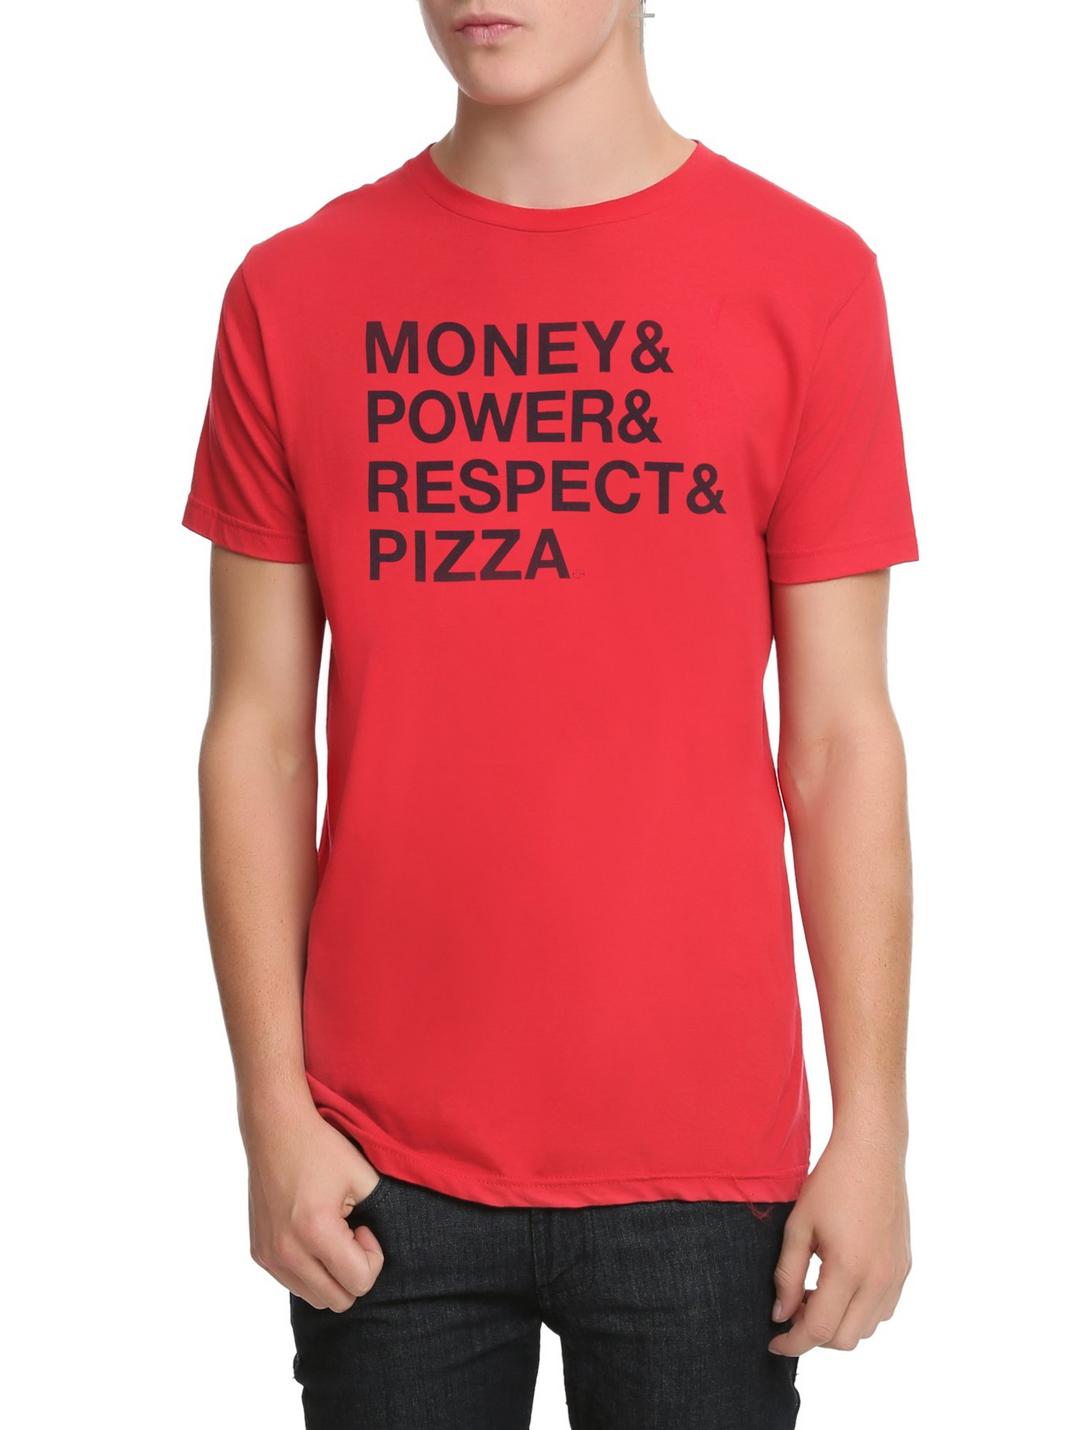 Money Power Respect Pizza T-Shirt, RED, hi-res